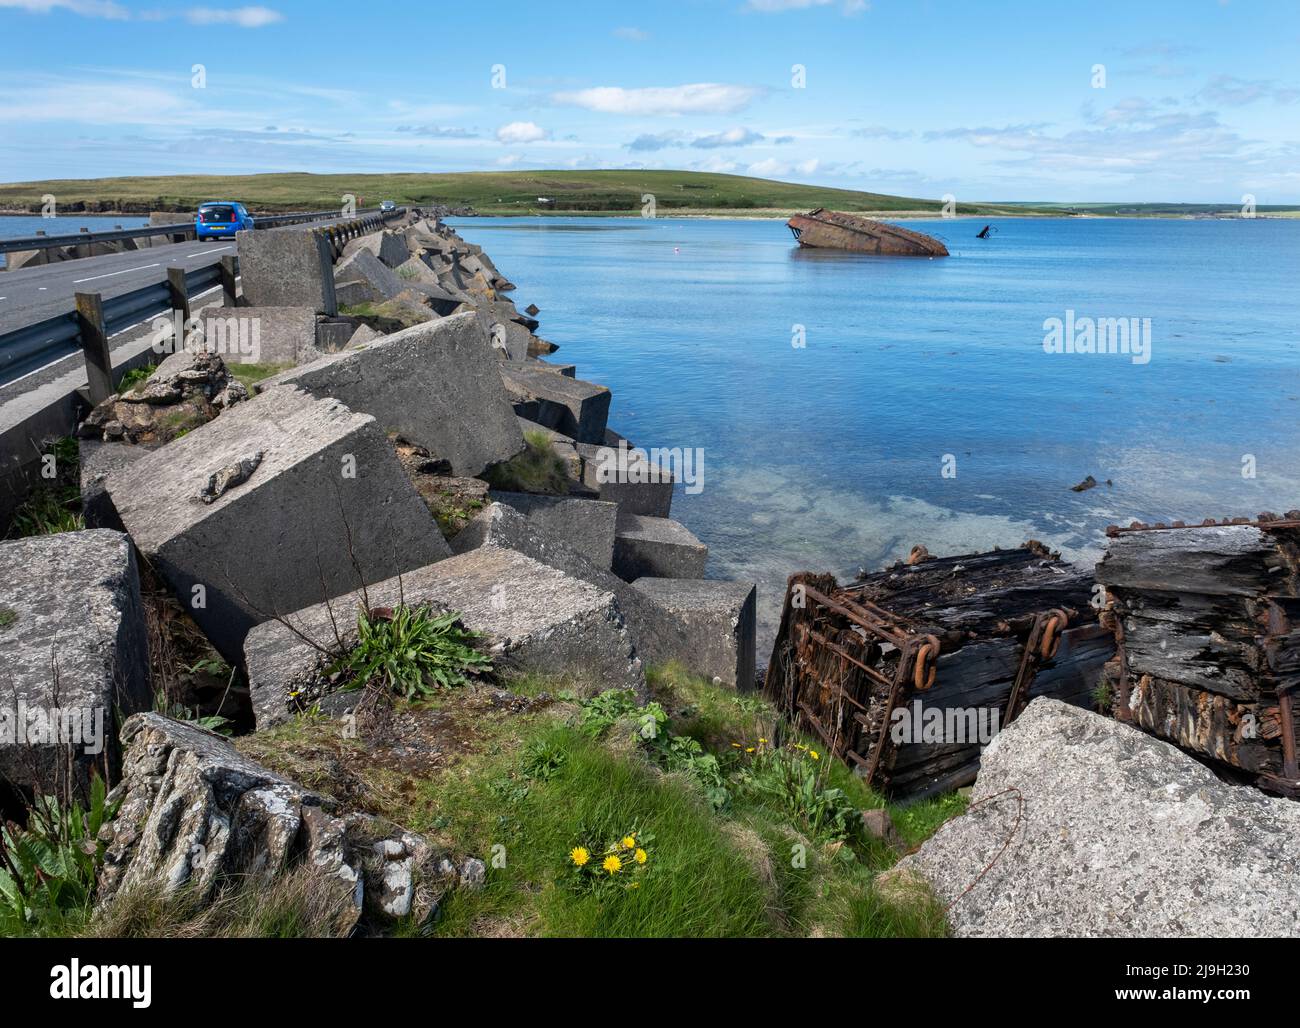 Churchill Barrier No.3 and 'block ship' partially submerged. The barrier links Glimps Holm and Burray, Orkney Islands, Scotland. Stock Photo